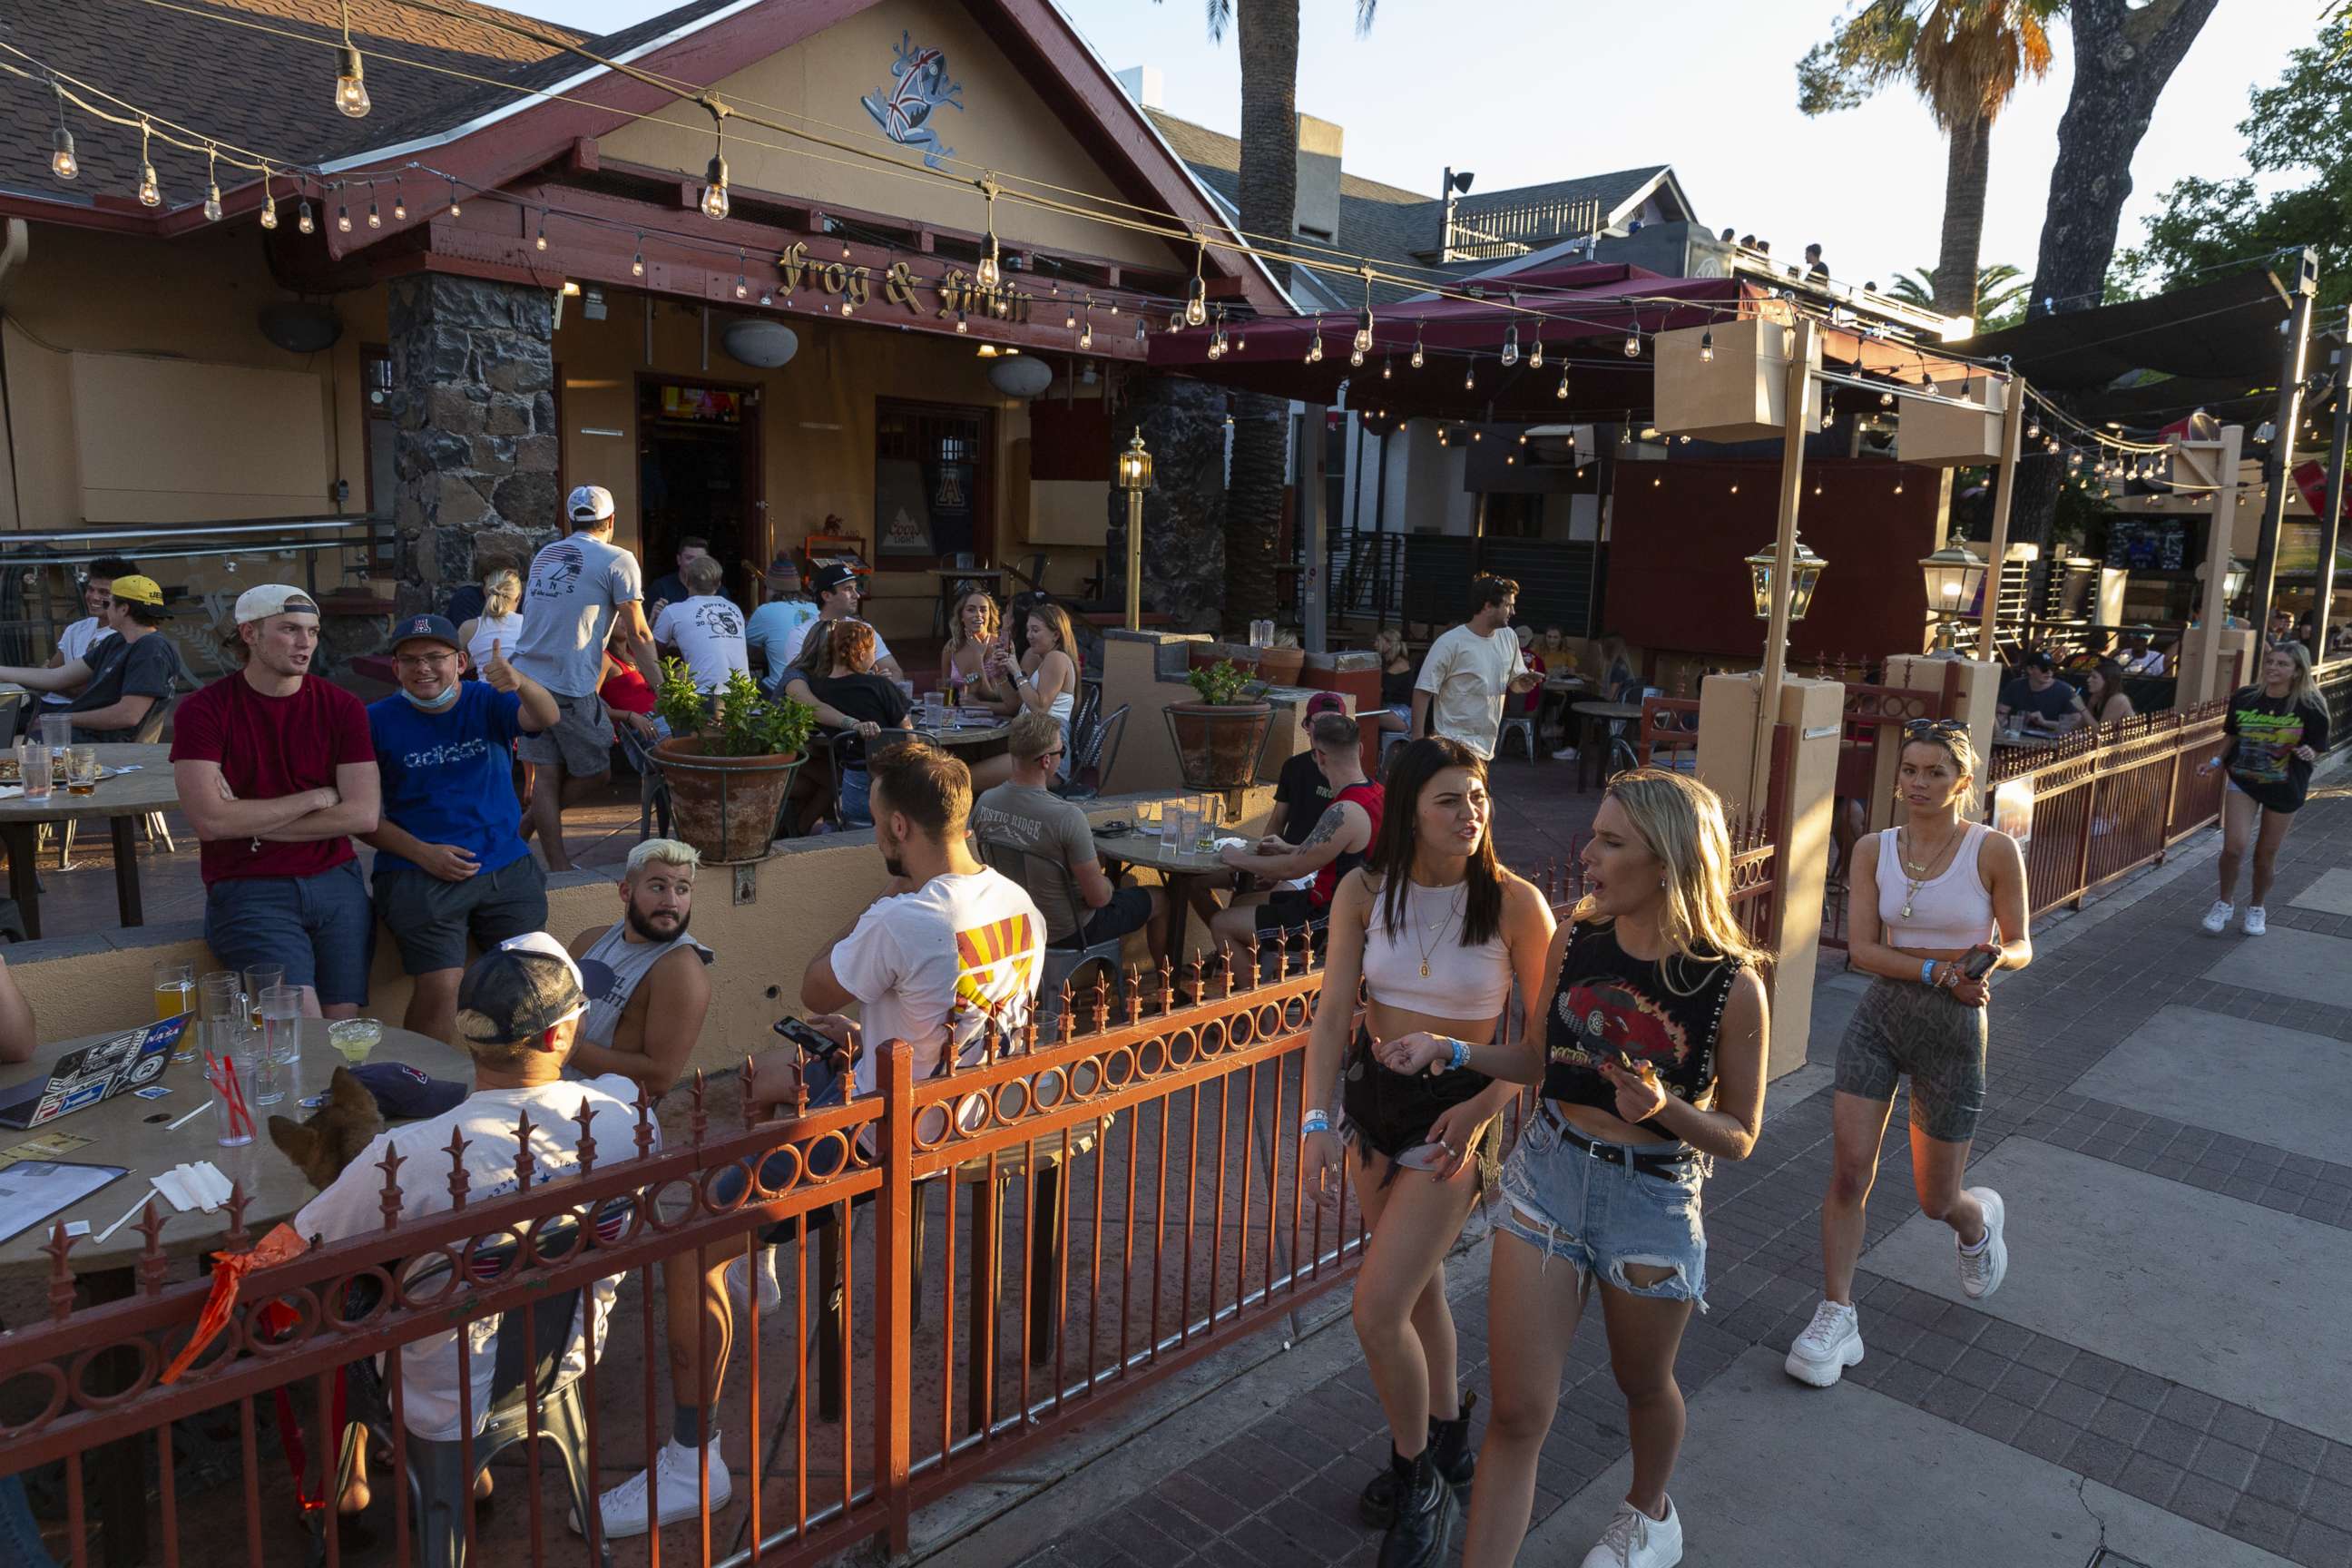 PHOTO: Pedestrians walk past customers sitting outside at a bar in Tucson, Arizona, U.S., on Monday, May 11, 2020.